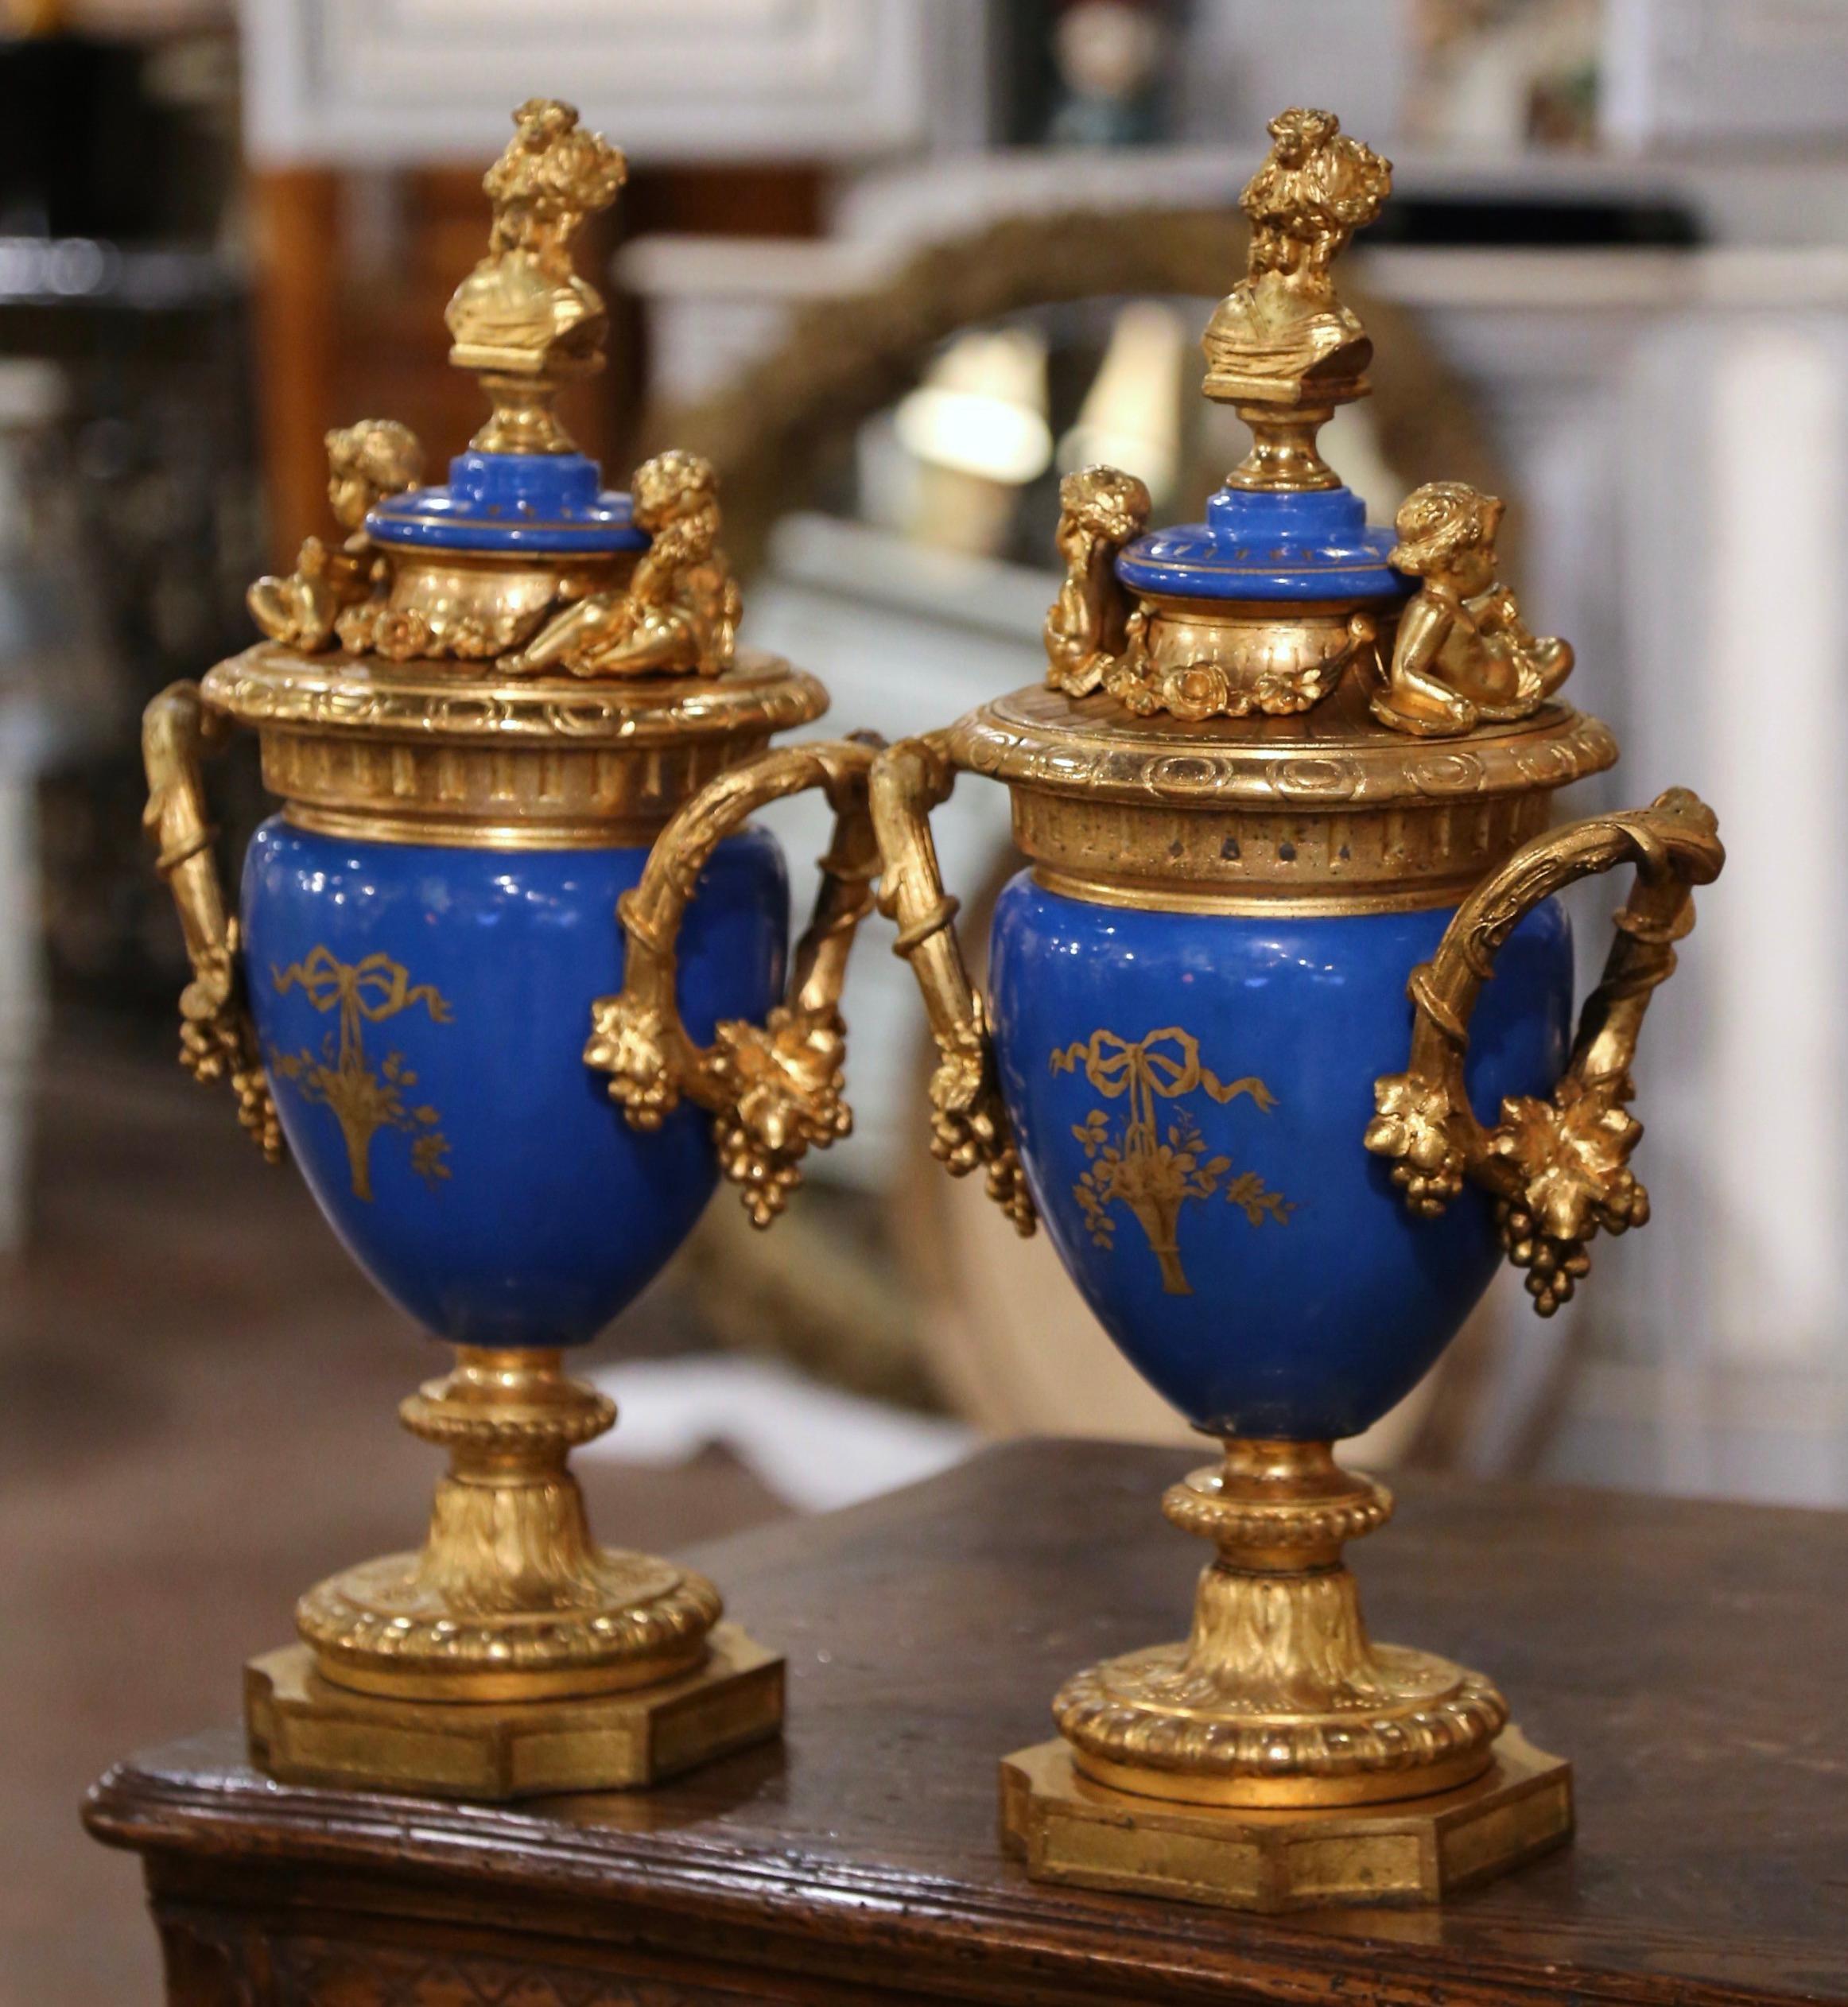 Pair of 19th Century French Blue Porcelain and Gilt Bronze Sèvres Urns Vases For Sale 6